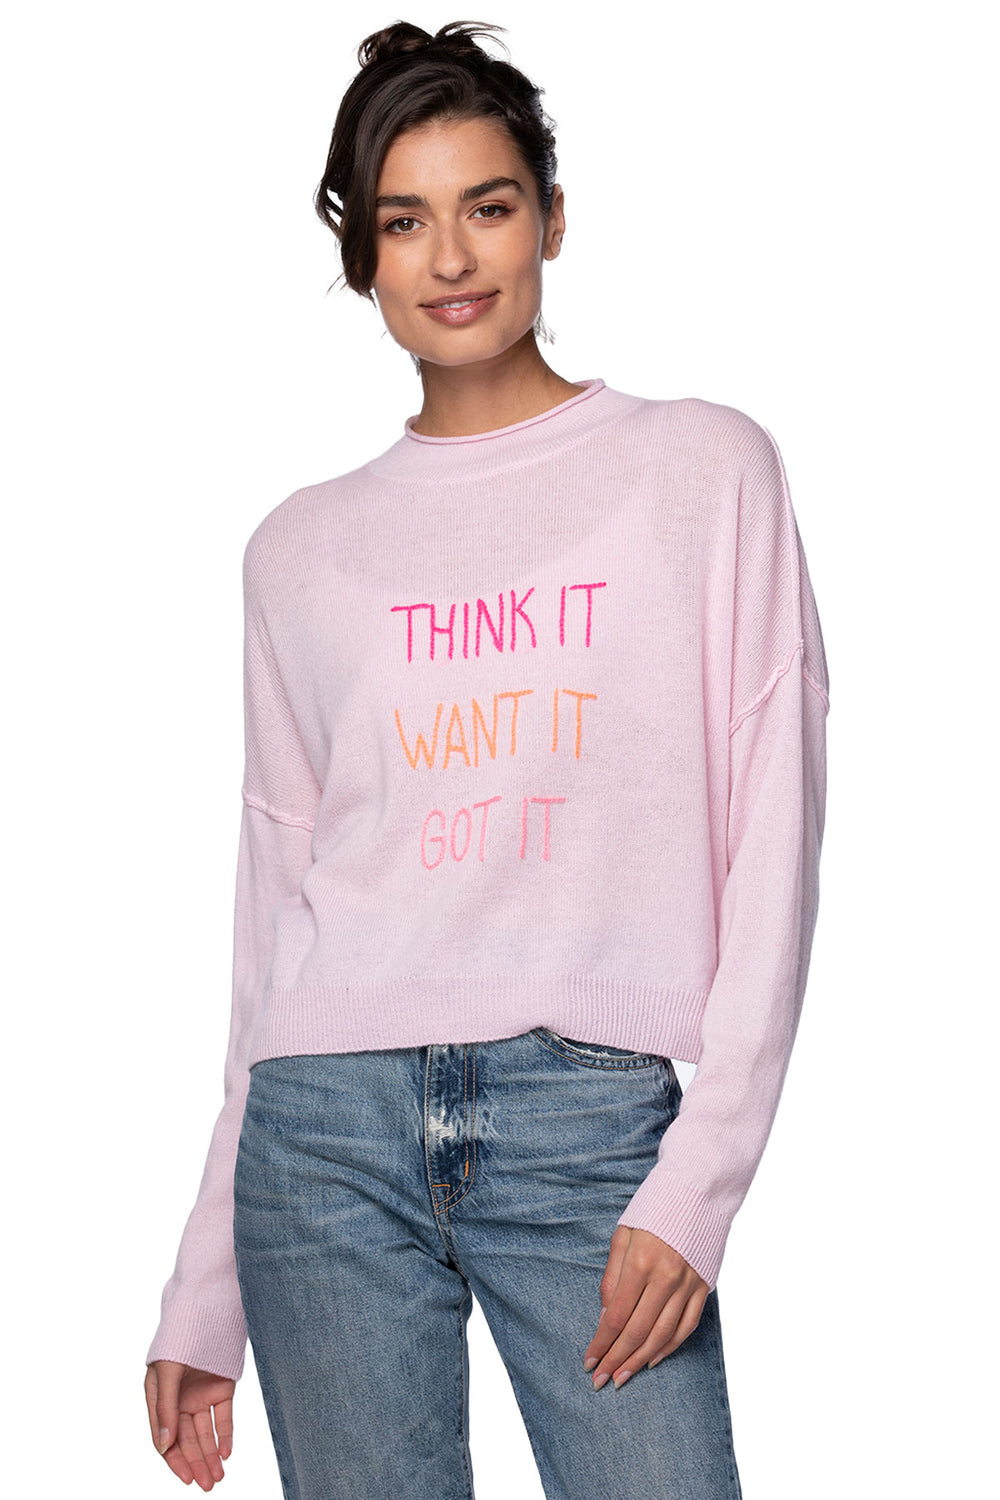 Funnel Neck Embroidery Cashmere Sweater |  Think it -Want it - Got it - goldensunbrand